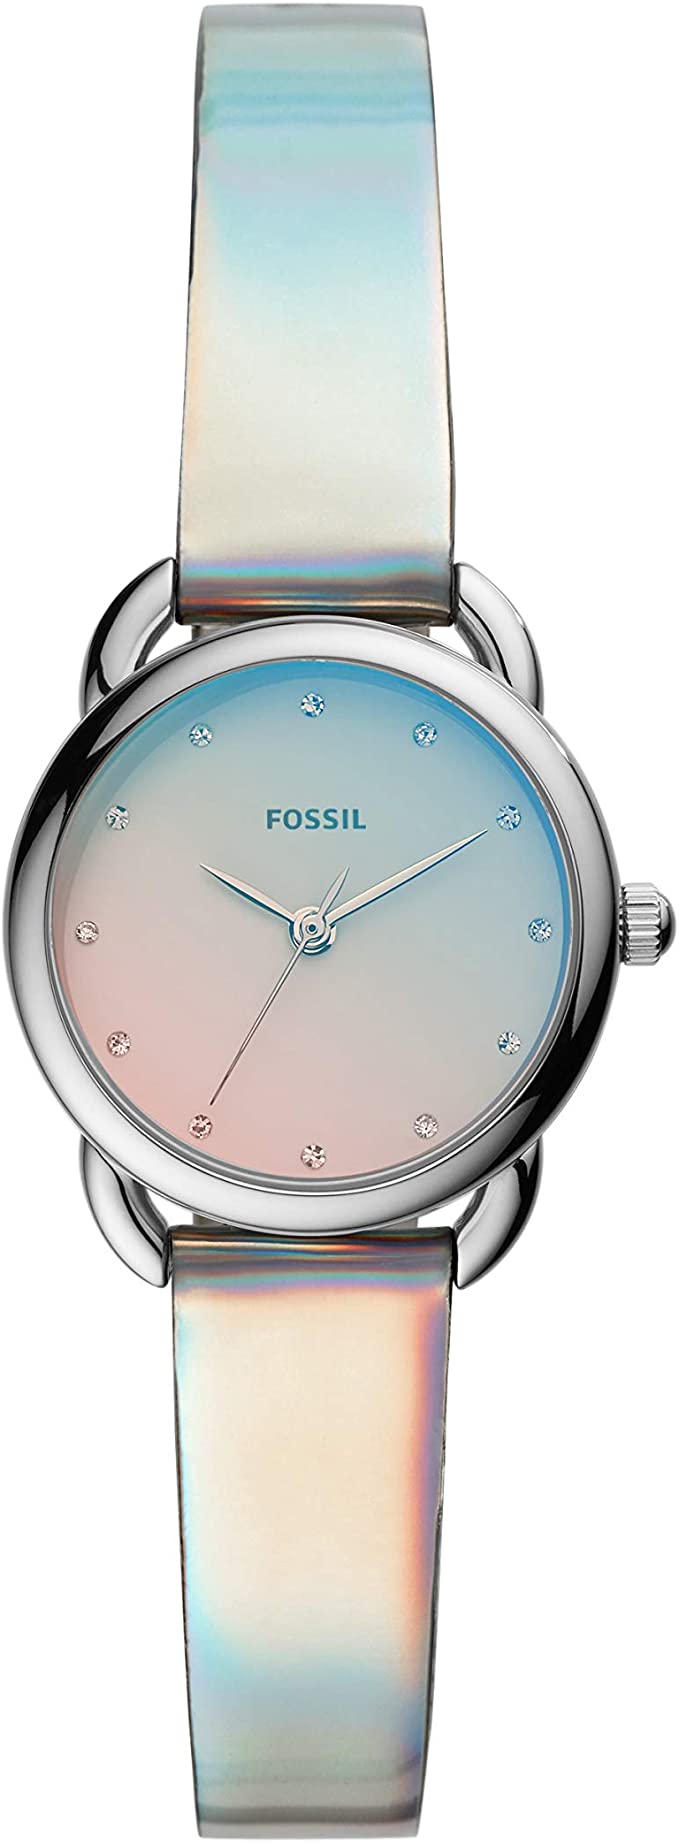 Ladies Mini Tailor Watch (Iridescent) | Fossil | Luby 